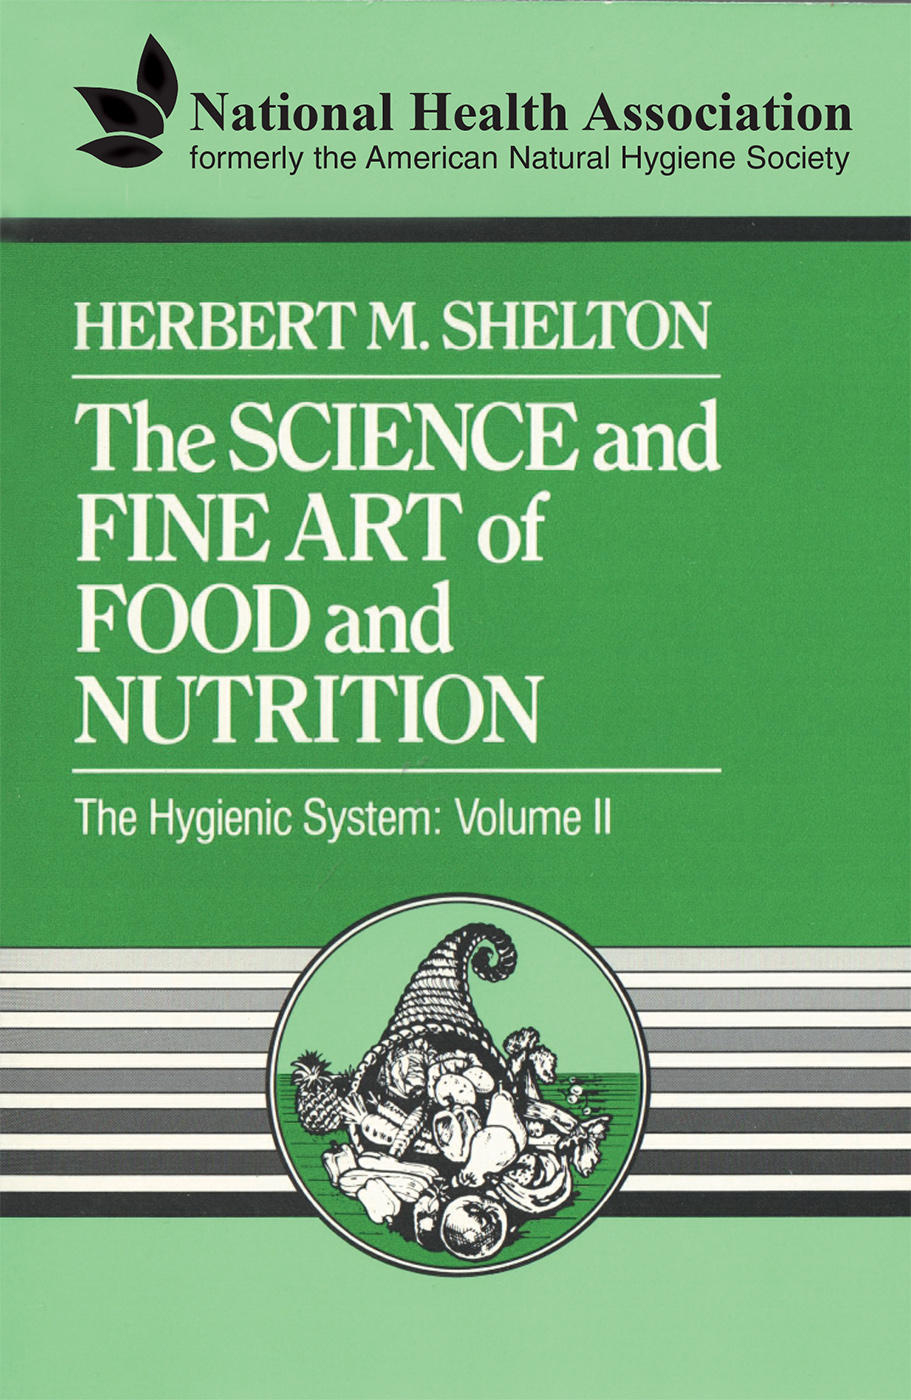 https://www.healthscience.org/wp-content/uploads/files/images/product/Science_of_Fine_Art_and_Nutrition%20cover.jpg